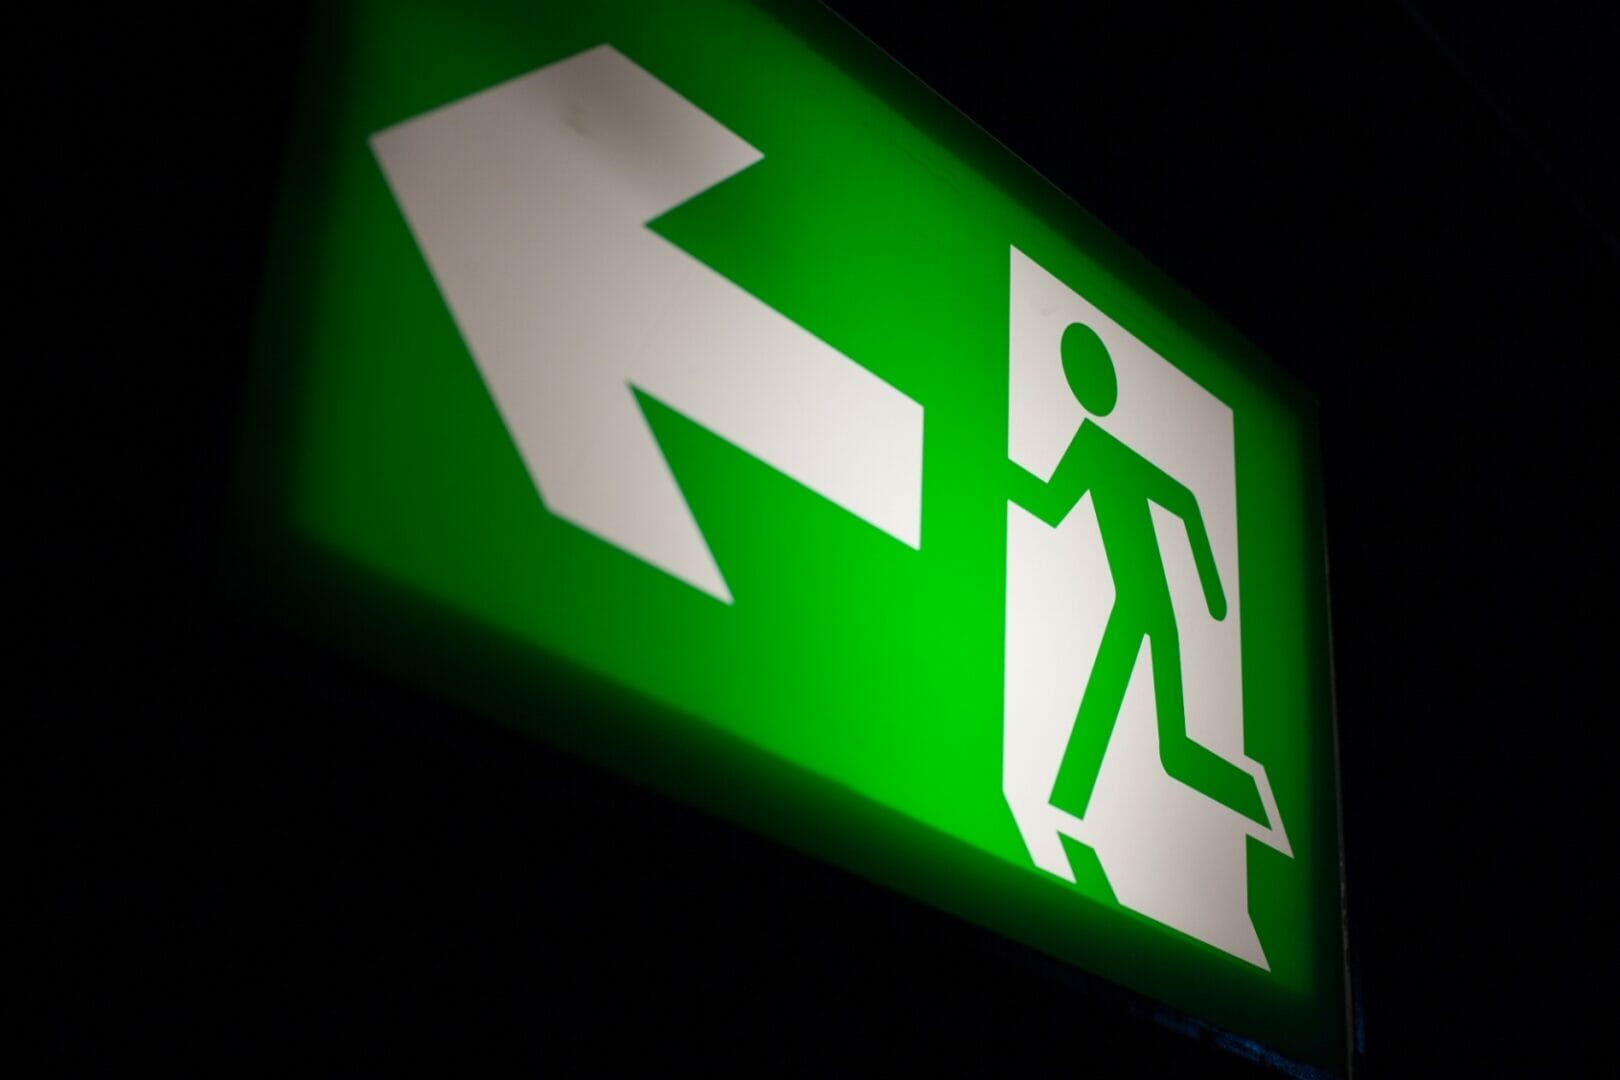 CAN GATHERING DATA REALLY SAVE LIVES? THE MODERN EMERGENCY LIGHTING SCHEME IS BECOMING INTELLIGENT!